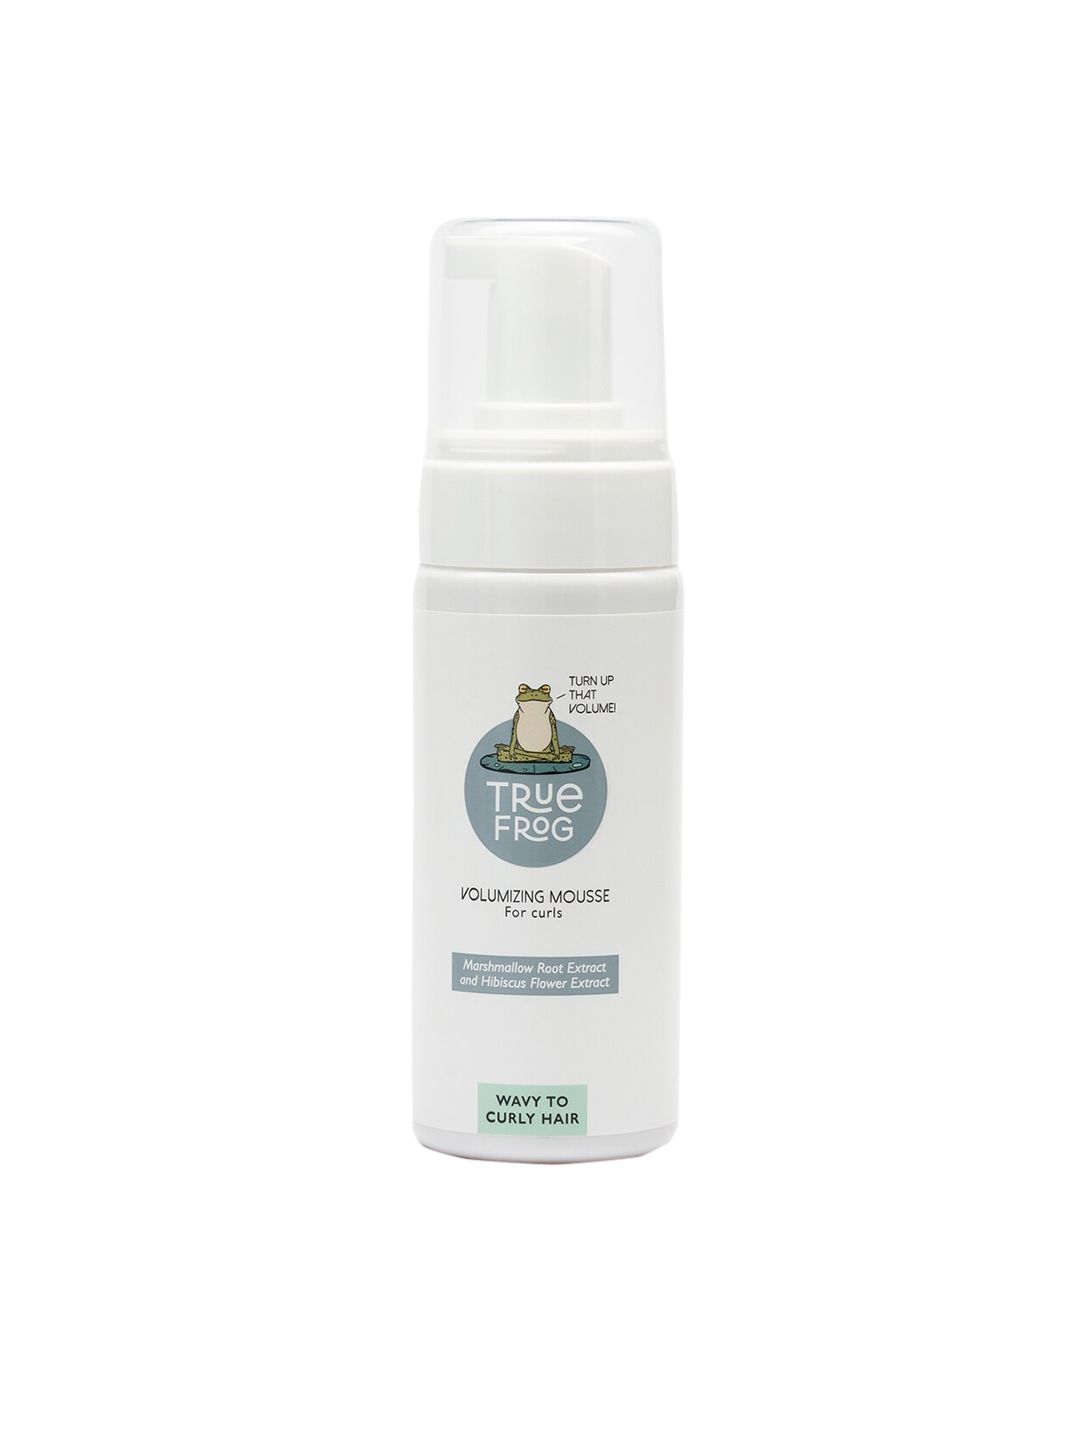 TRUe FRoG Volumizing Mousse for Curls - 150 ml Price in India